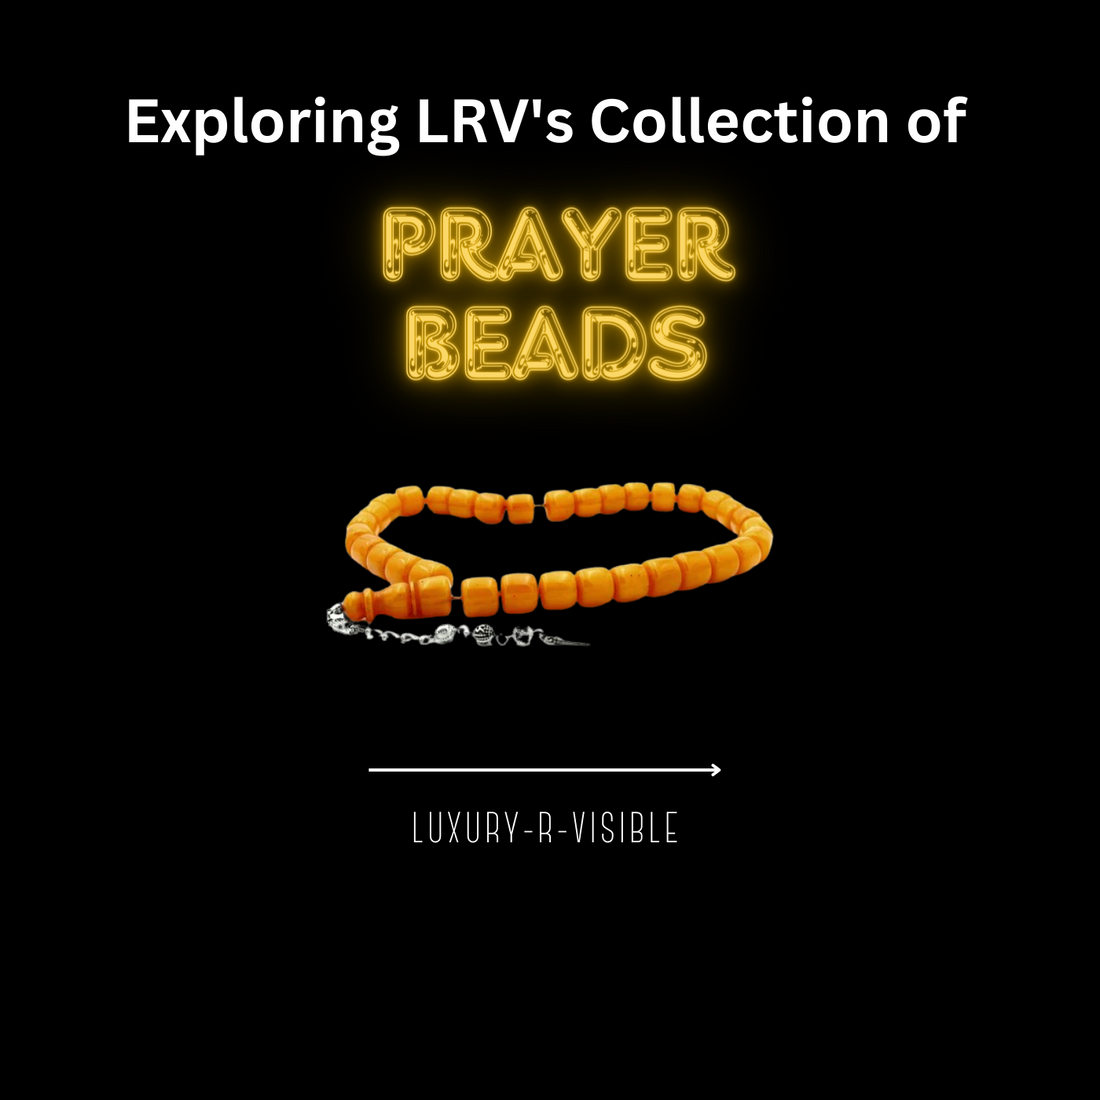 Exploring LRV's Collection of Prayer Beads